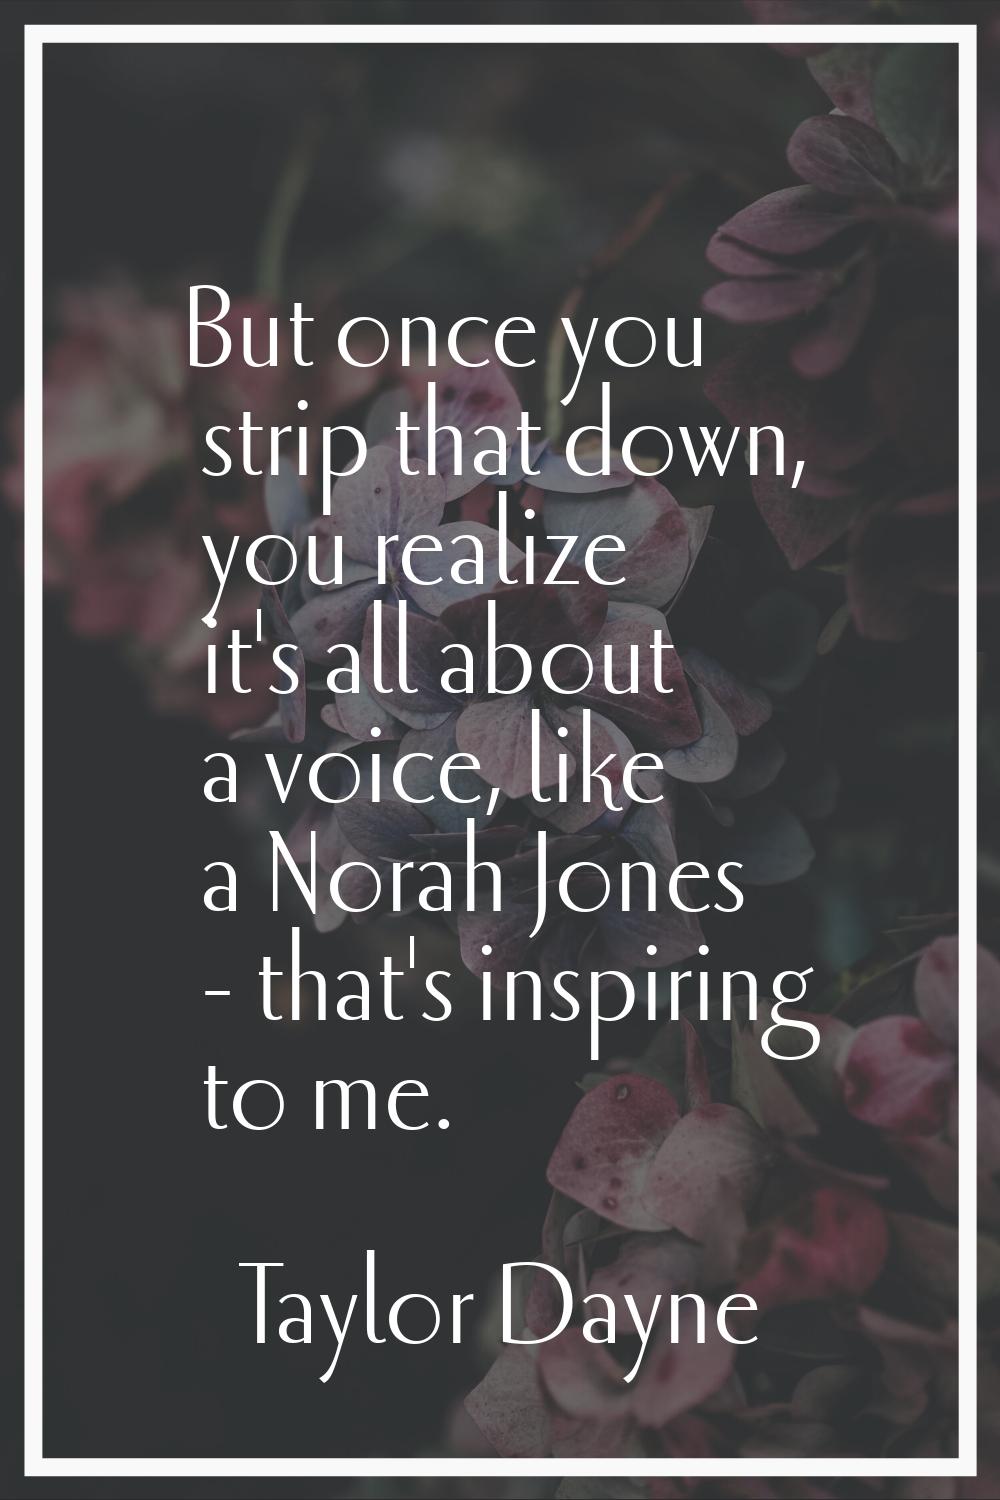 But once you strip that down, you realize it's all about a voice, like a Norah Jones - that's inspi